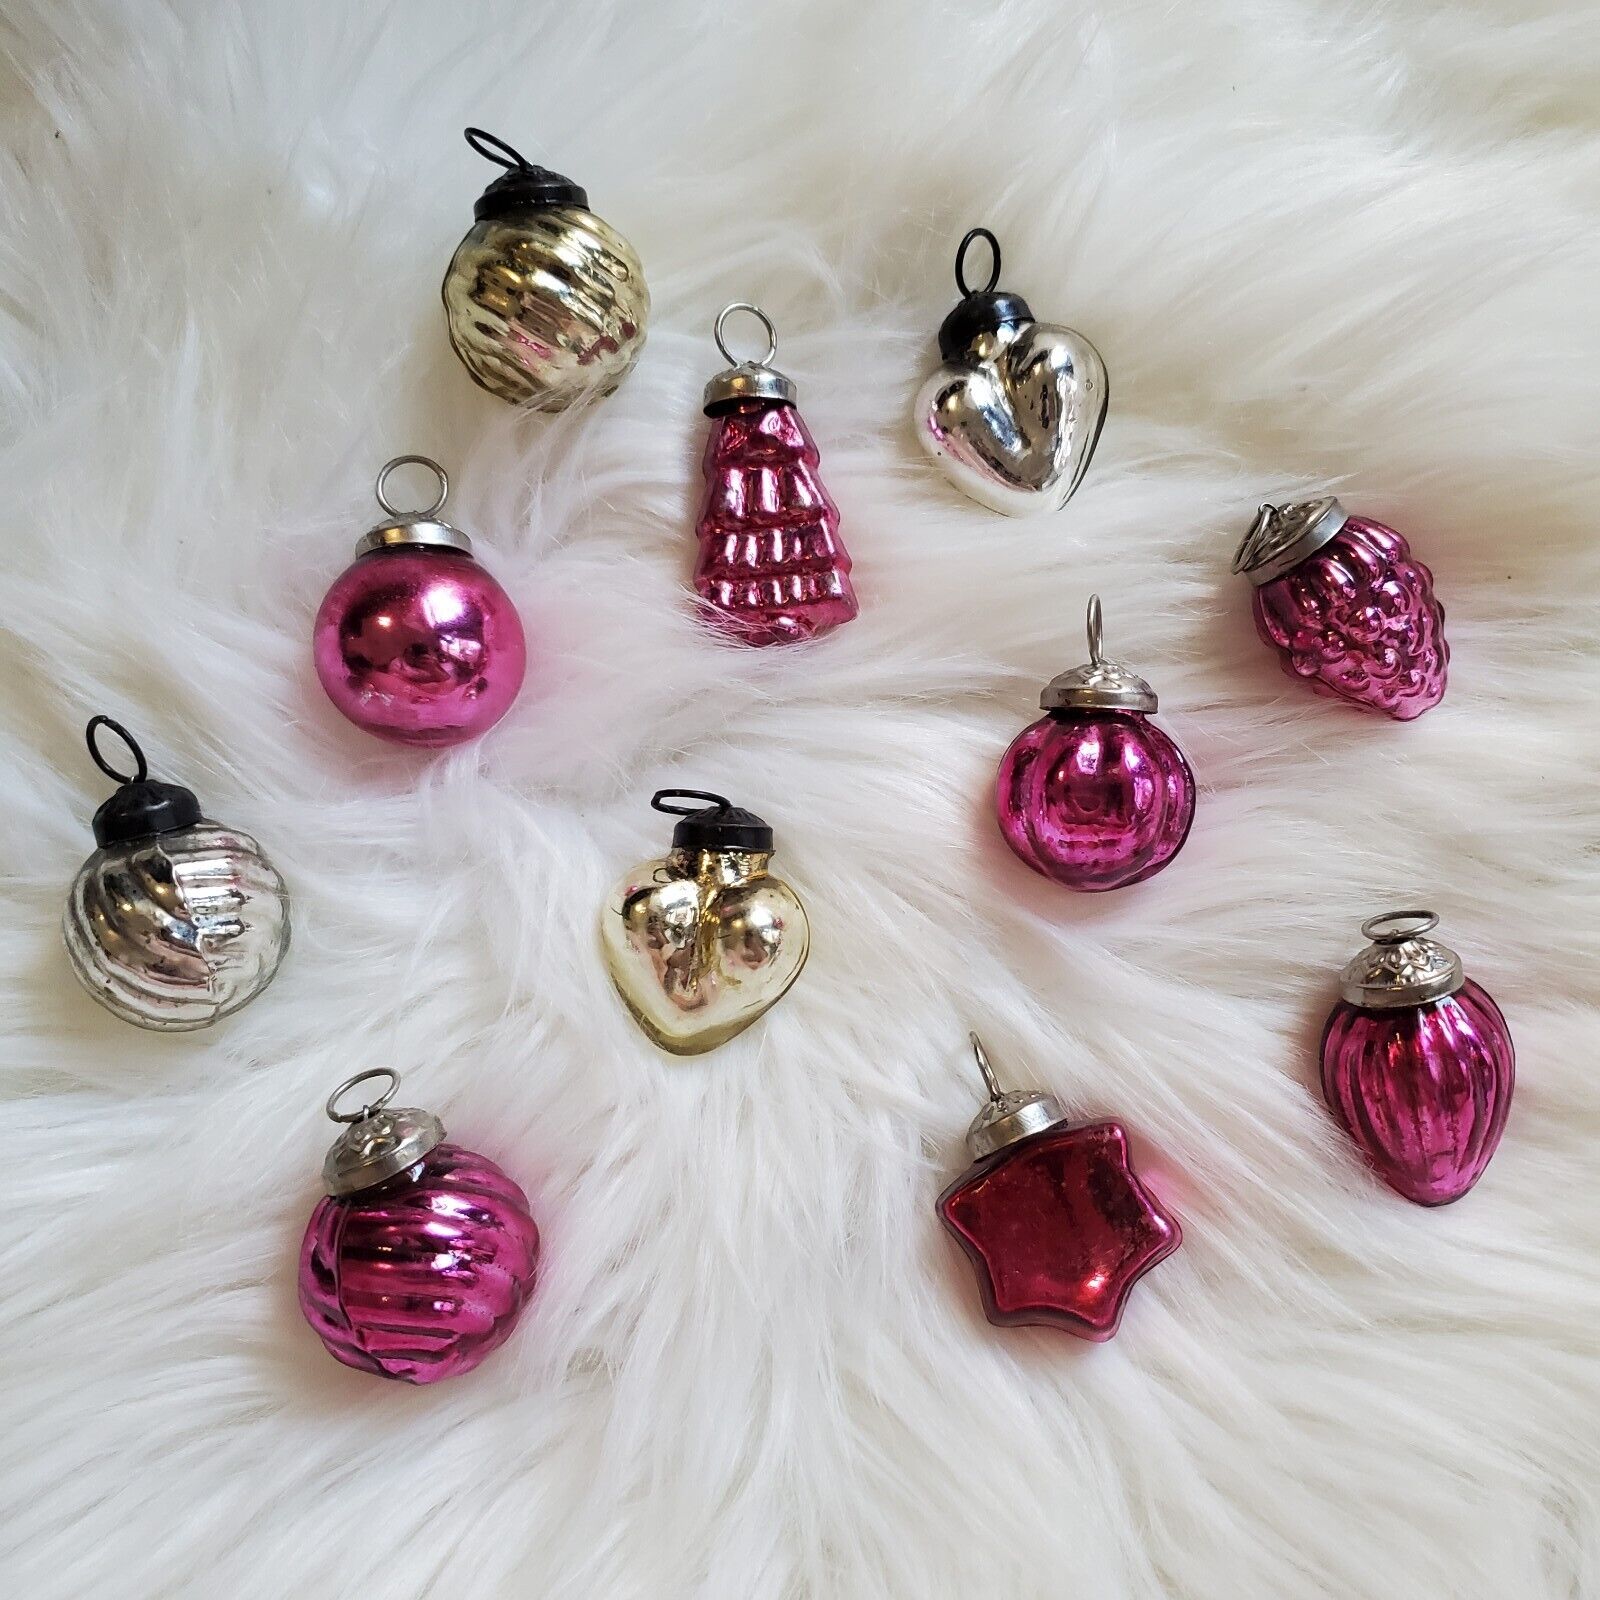 Vintage Old World Kugel Style Mercury Glass Christmas Ornaments Pink Silver